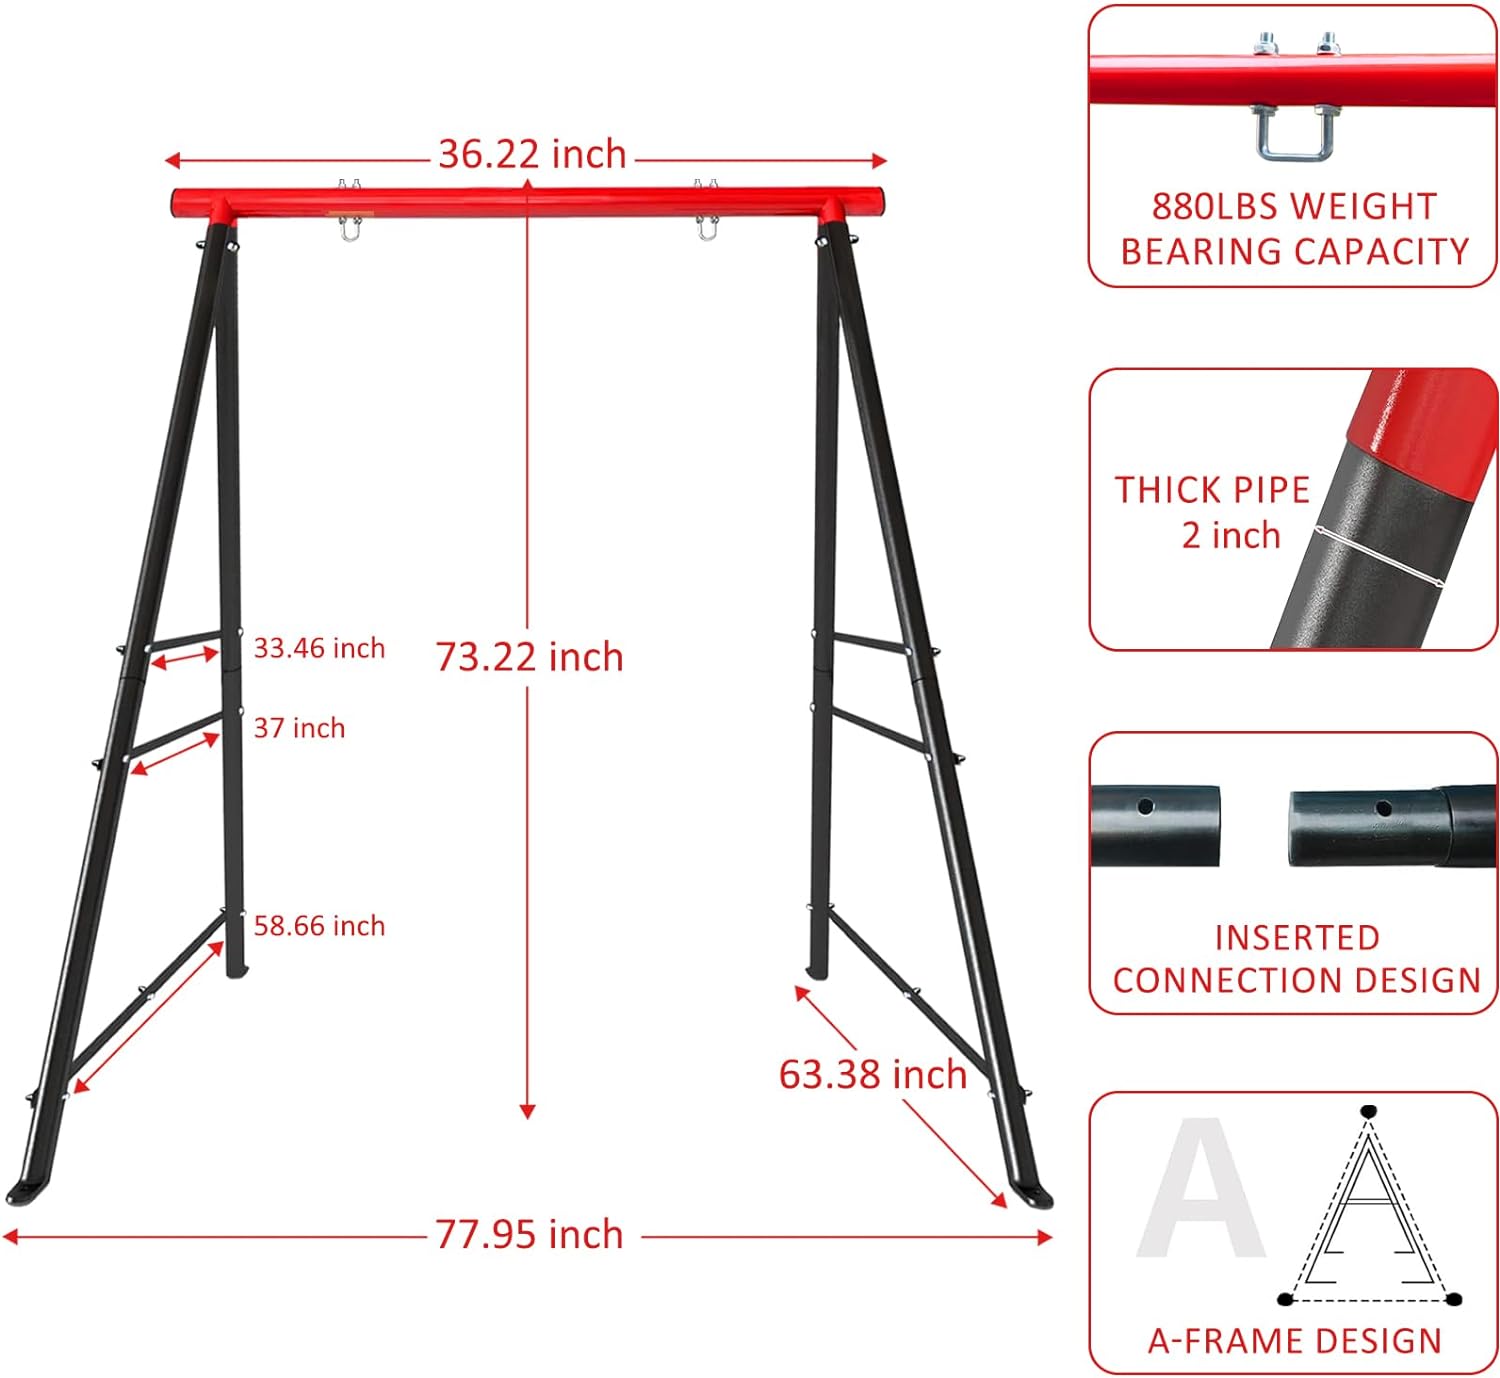 Swing Stand Frame, Swing Set Frame for Both Kids and Adults,880 Lbs Heavy-Duty Metal A-Frame Backyard Swing for Indoor Outdoor, Red(Without Swing)